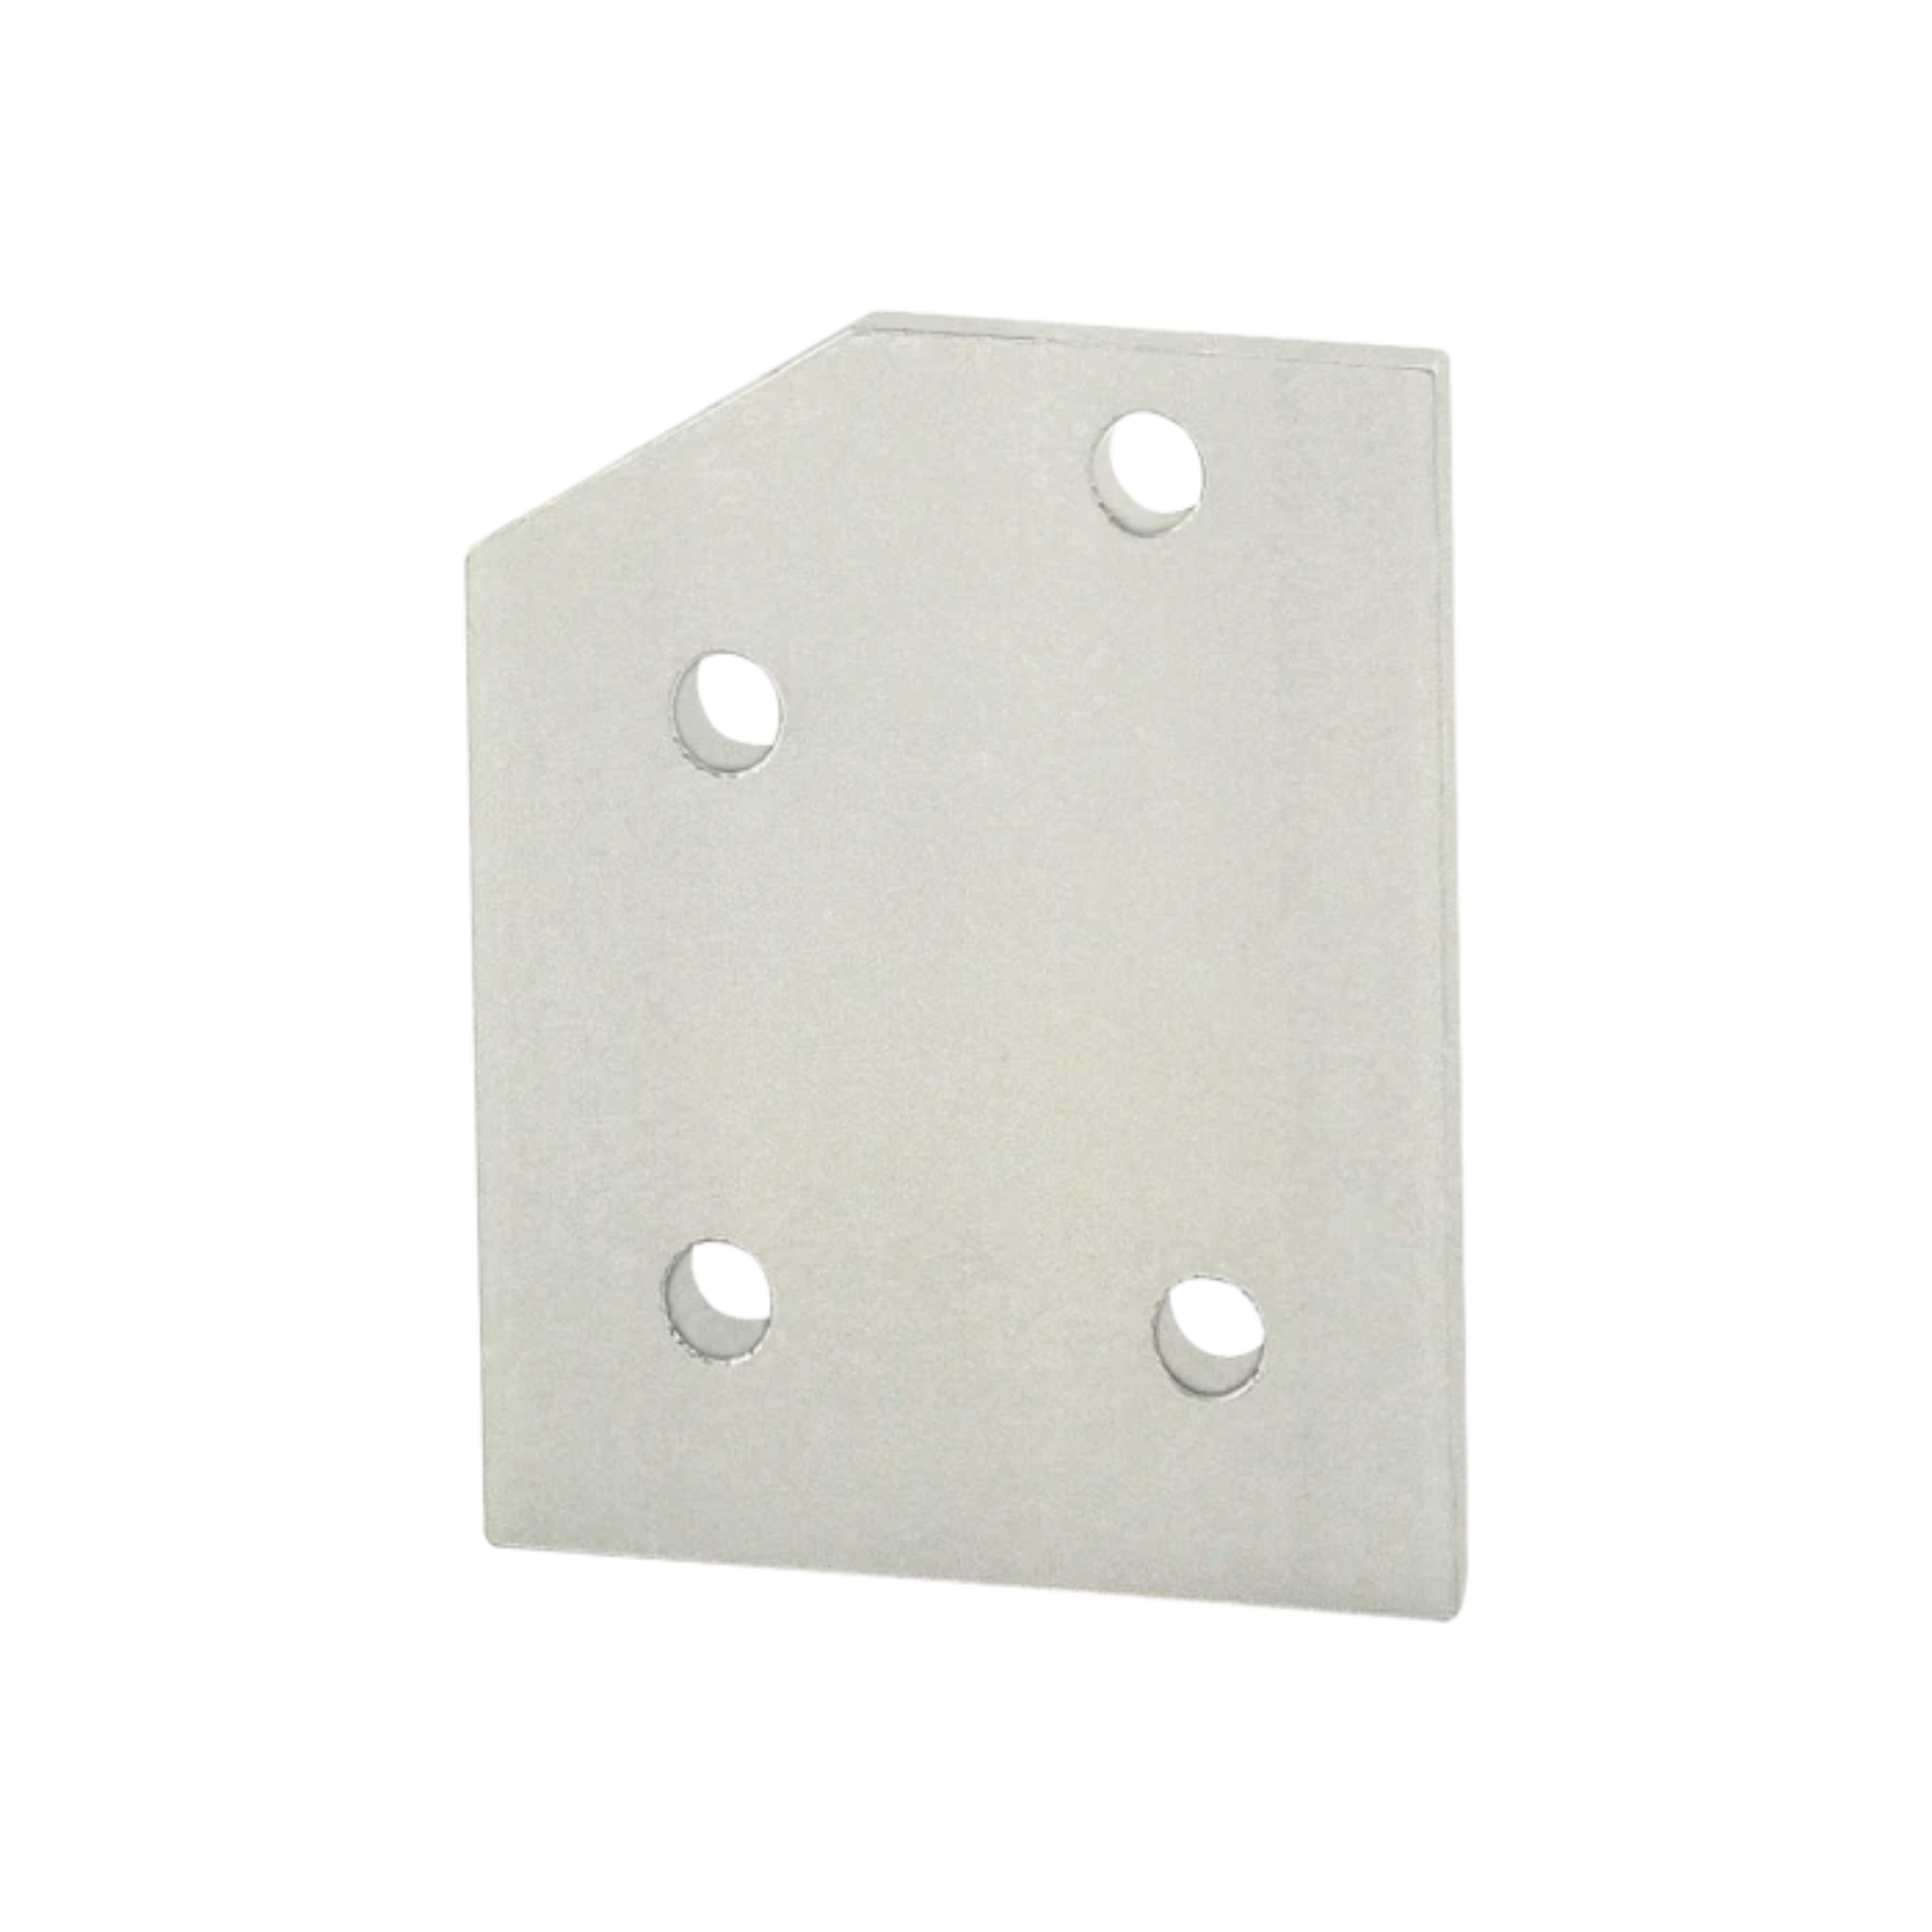 white, rectangular flat plate with an angled corner on the top left and four mounting holes